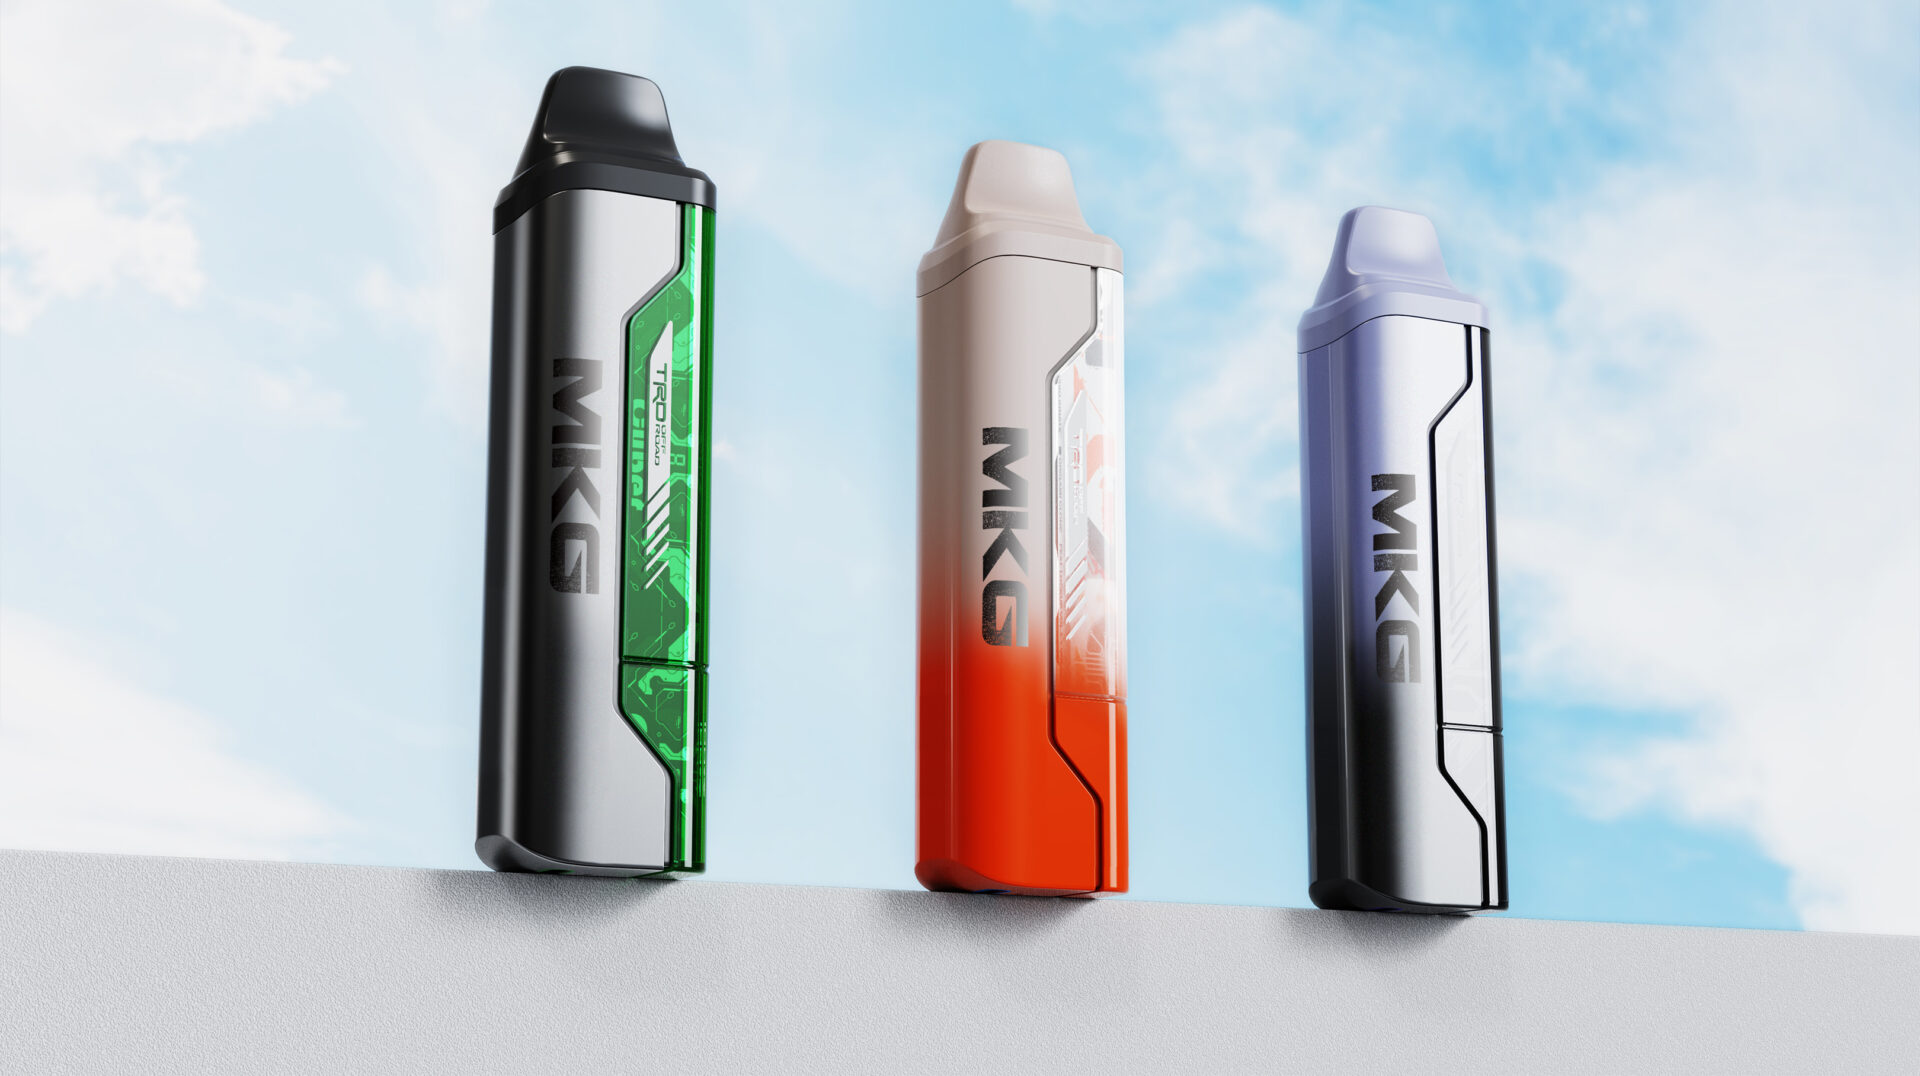 Huge Selection of Disposable Vapes Online. Disposable Vapes, also known as 'vape bars' or 'puff bars', offer users the ultimate all-in-one vape experience. Buy the best disposable vape kits and pod devices online at Vape 360 UK. We have the largest range of disposable vapes available in the UK